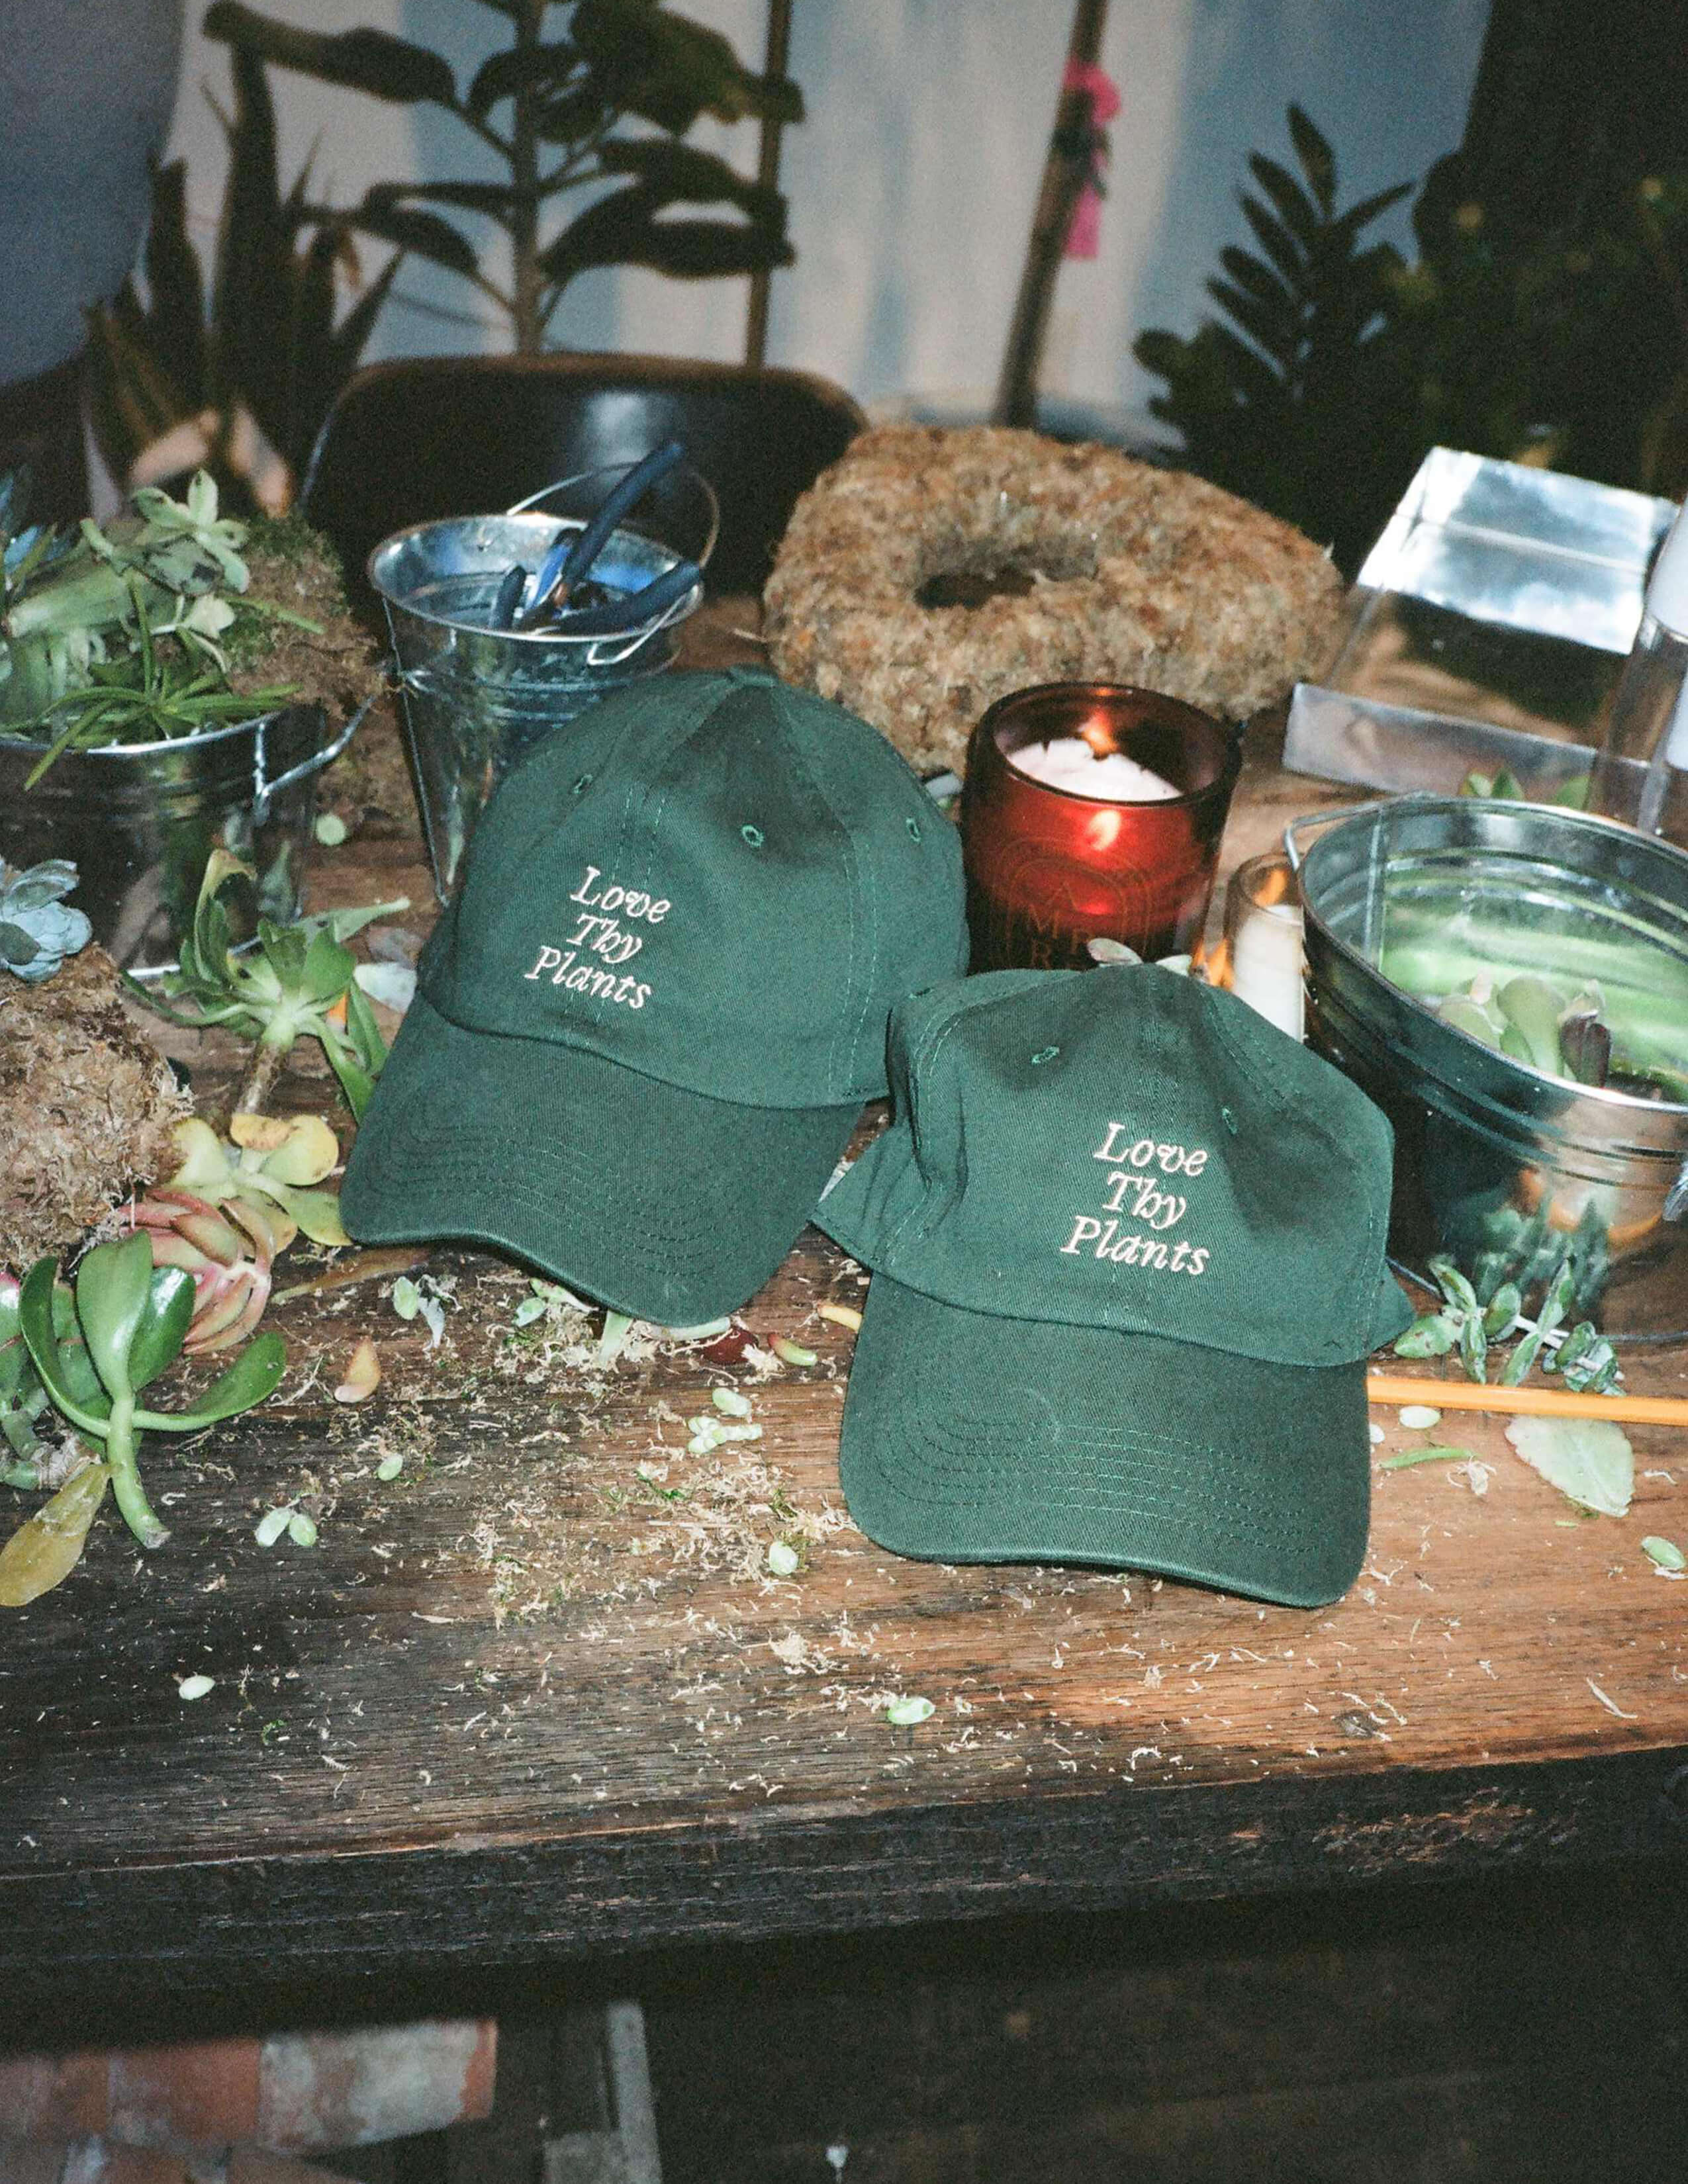 Two ‘Love Thy Plants’ caps with different kinds of materials for making wreaths on the table.